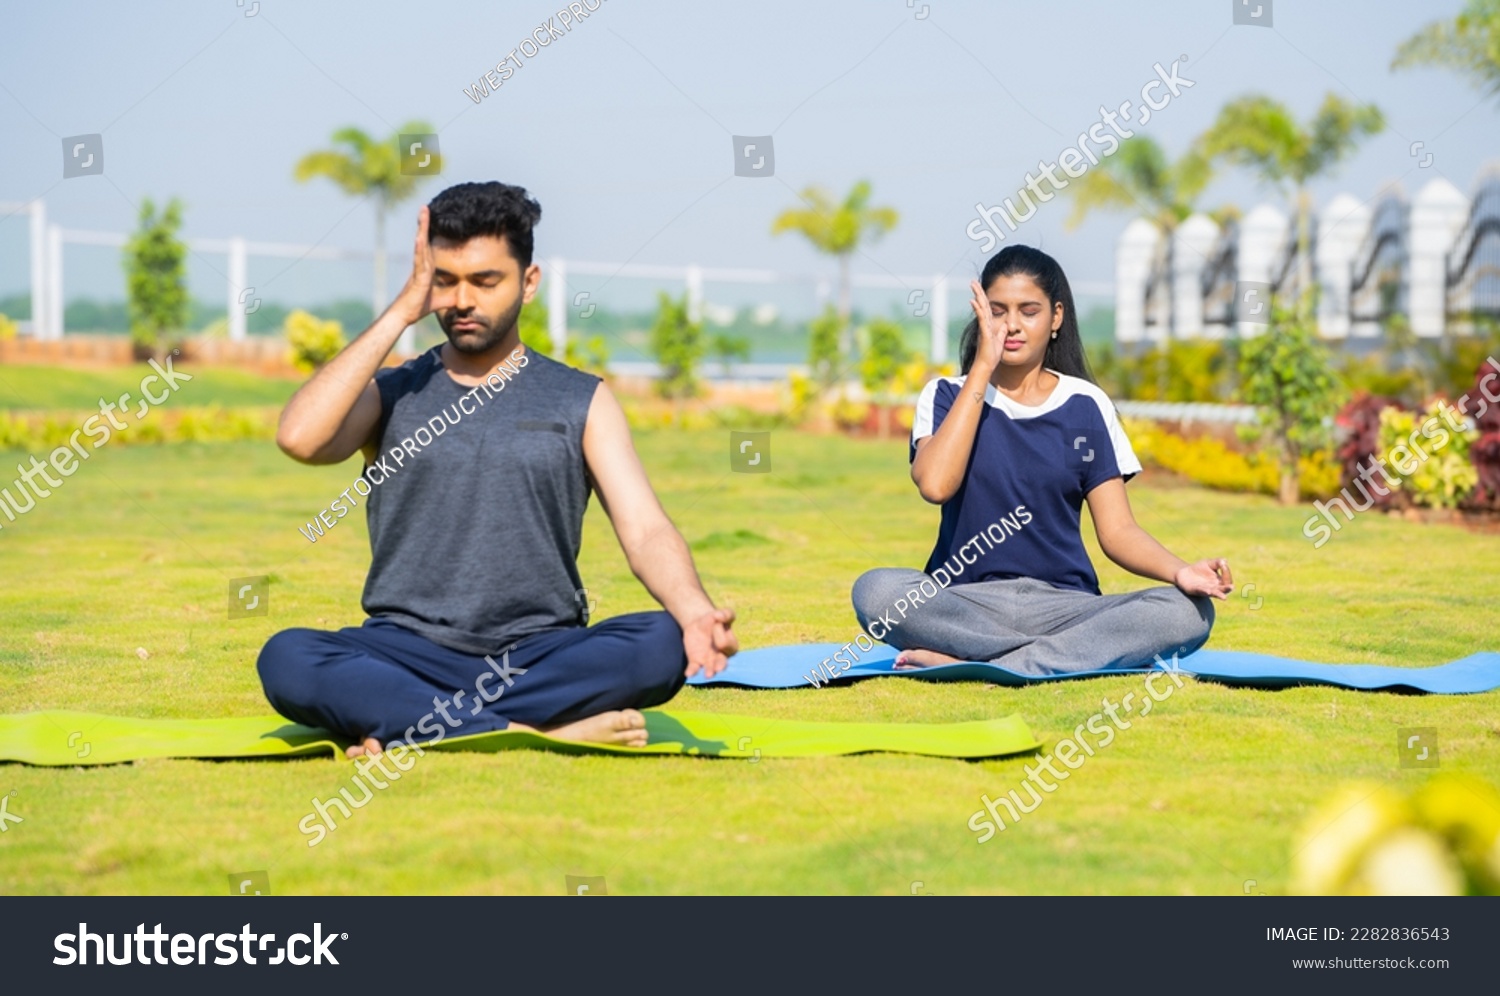 Young couple doing yoga or pranayama with eyes closed during morning at park - concept of healthy lifestyles, mindfulness and morning rituals #2282836543